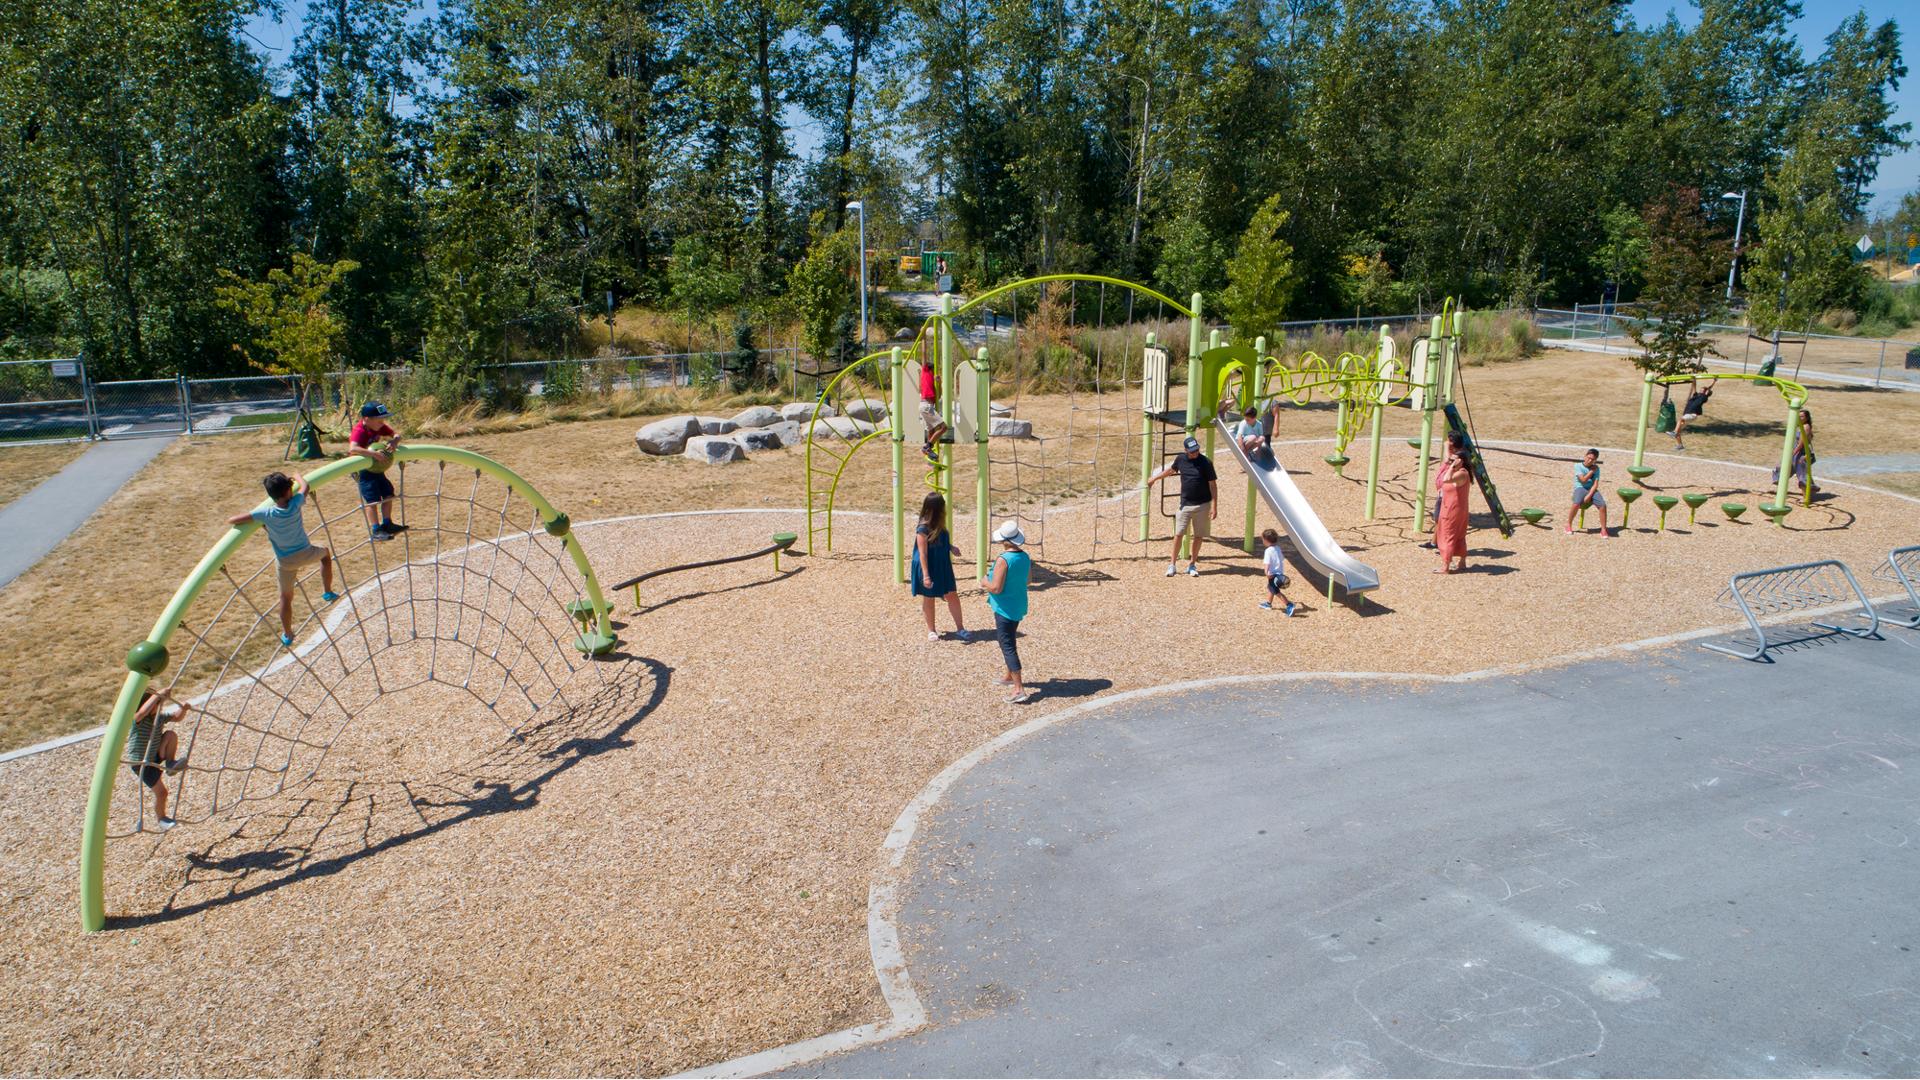 Families play at an outdoor park with a full tree line in the background. Children climb on a half-moon arch play structure with ropes like a spider’s web. Other families play on a second play structure with climbers and slides.